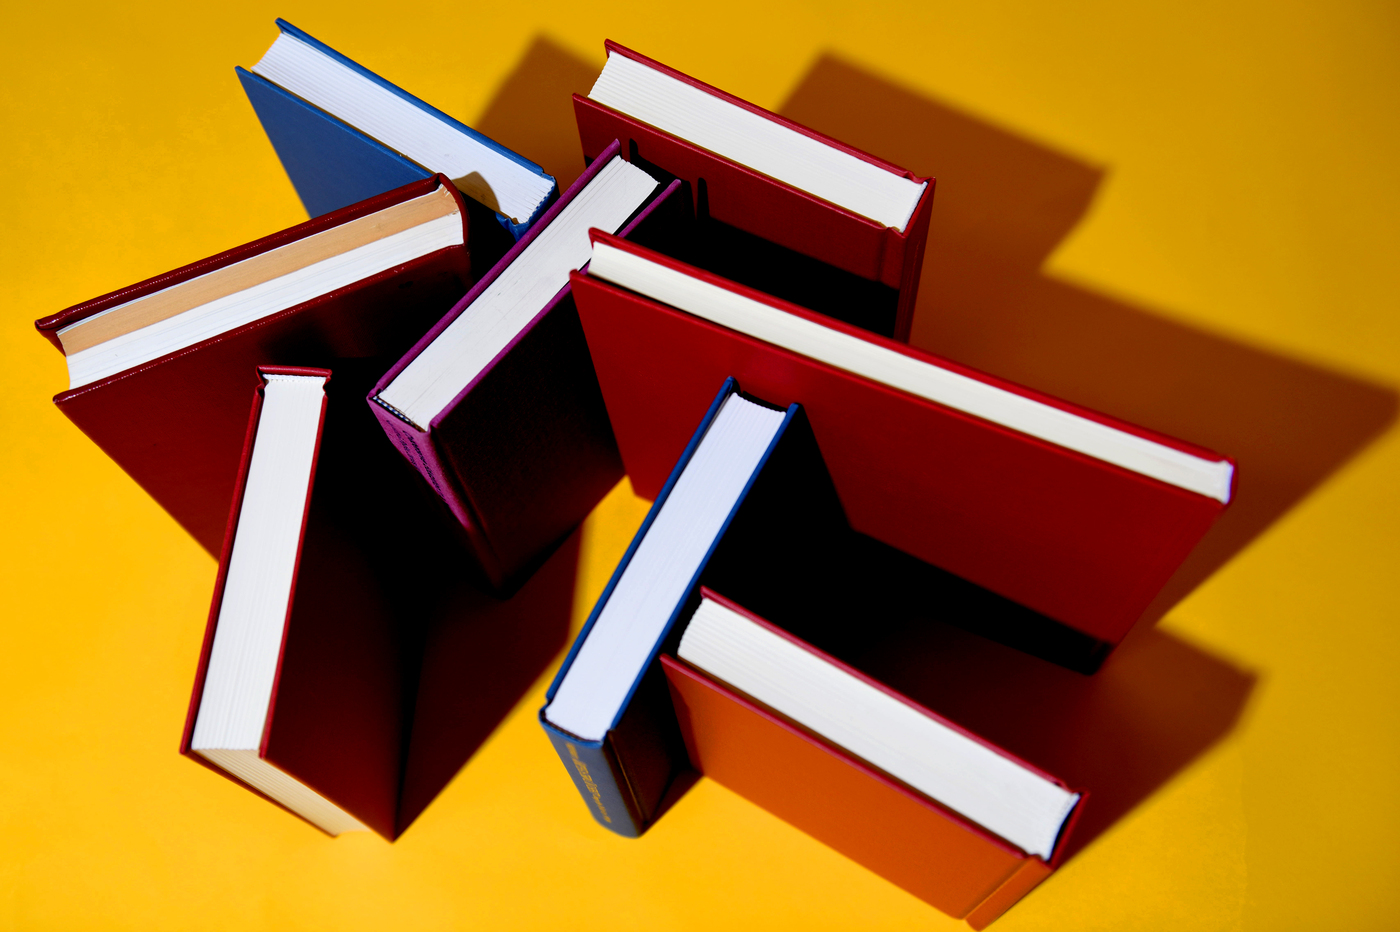 books stacked on a yellow background